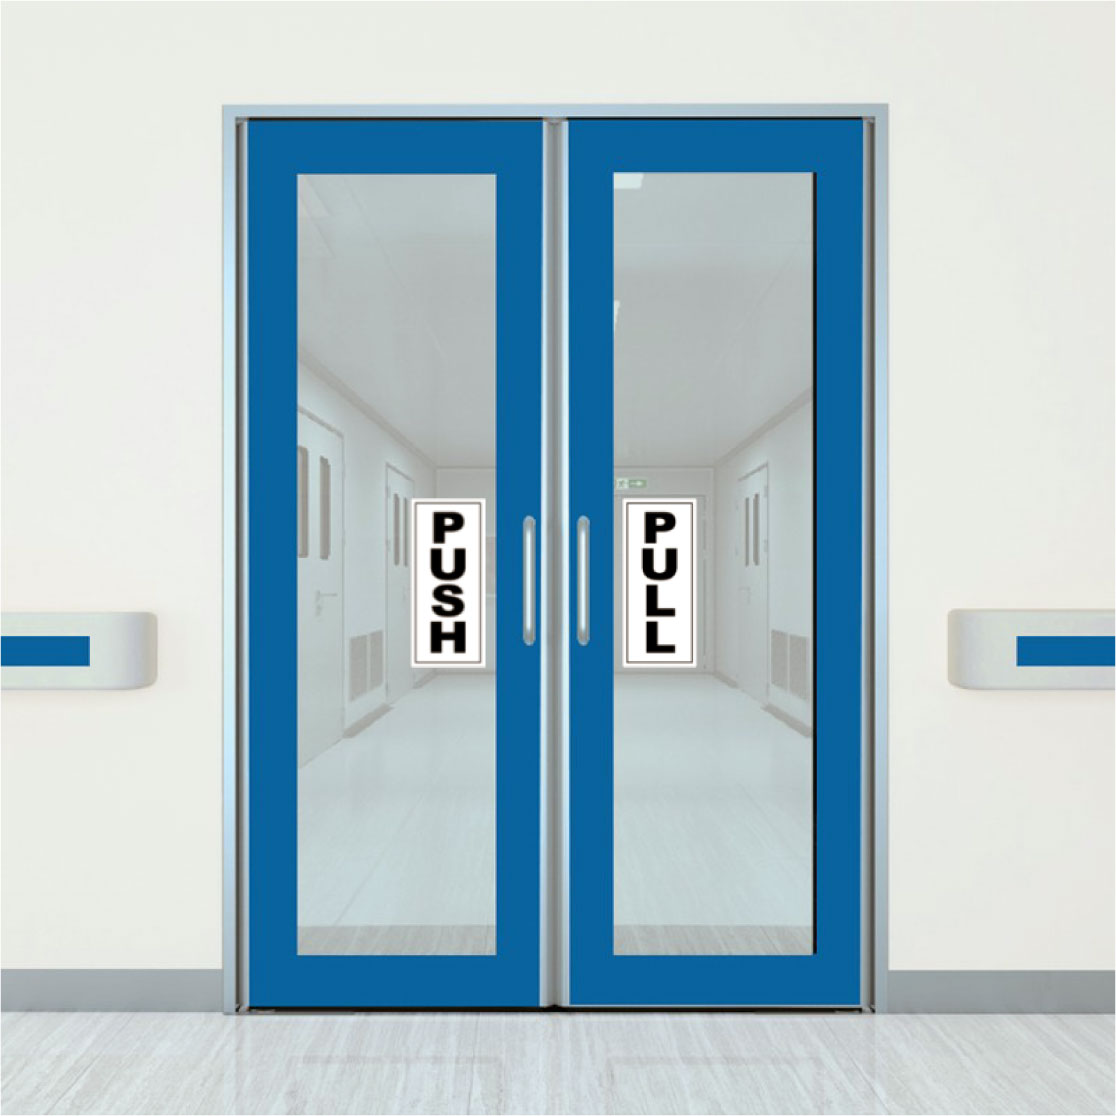 https://www.nplabel.com/images/products_gallery_images/591690B-Push-_-Pull-Door-Sign.jpg